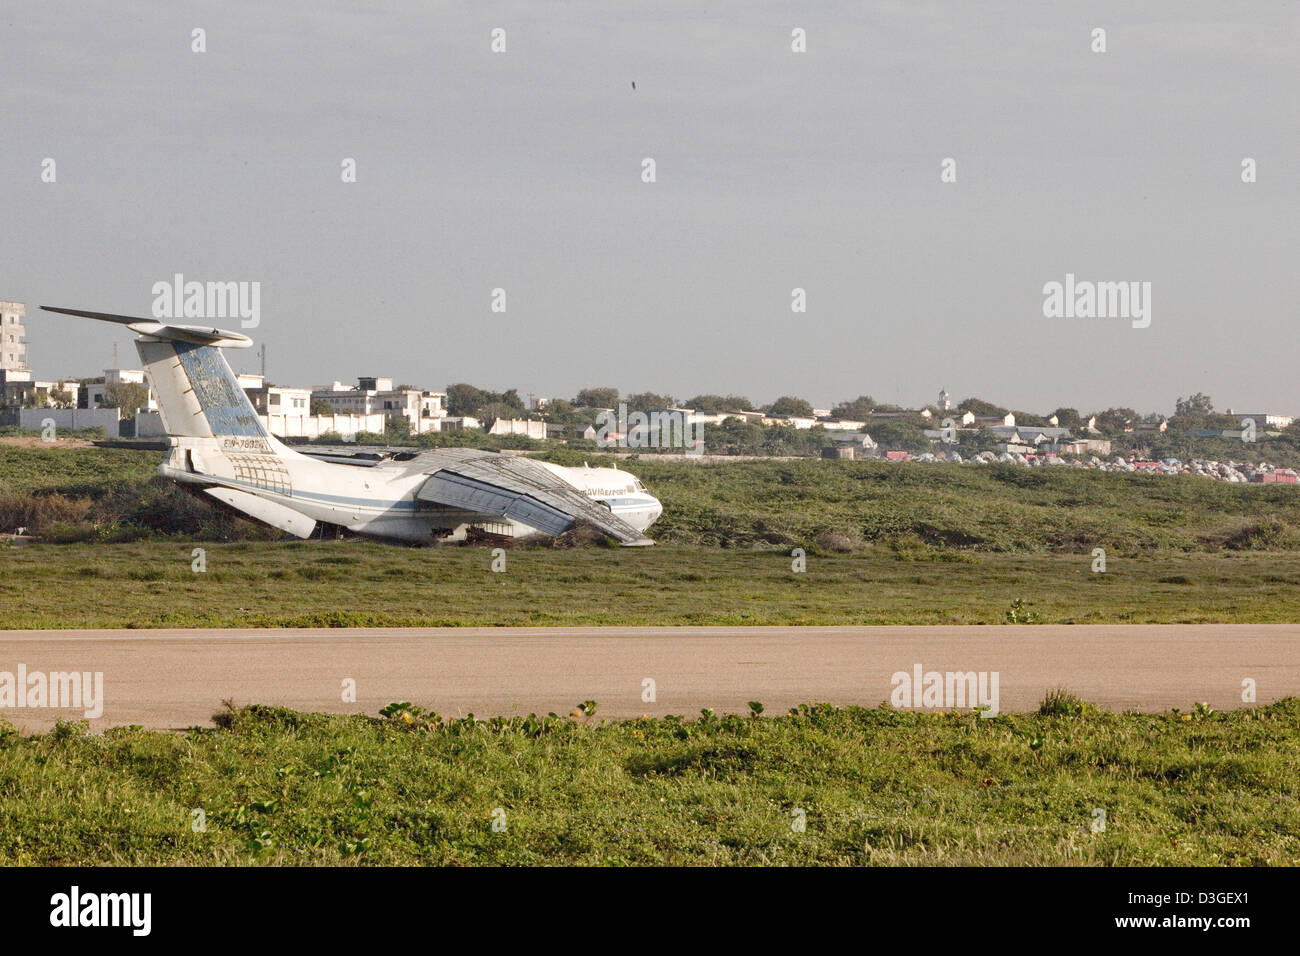 A disused aeroplane on the side of the main runway at Aden Ade International Airport Stock Photo